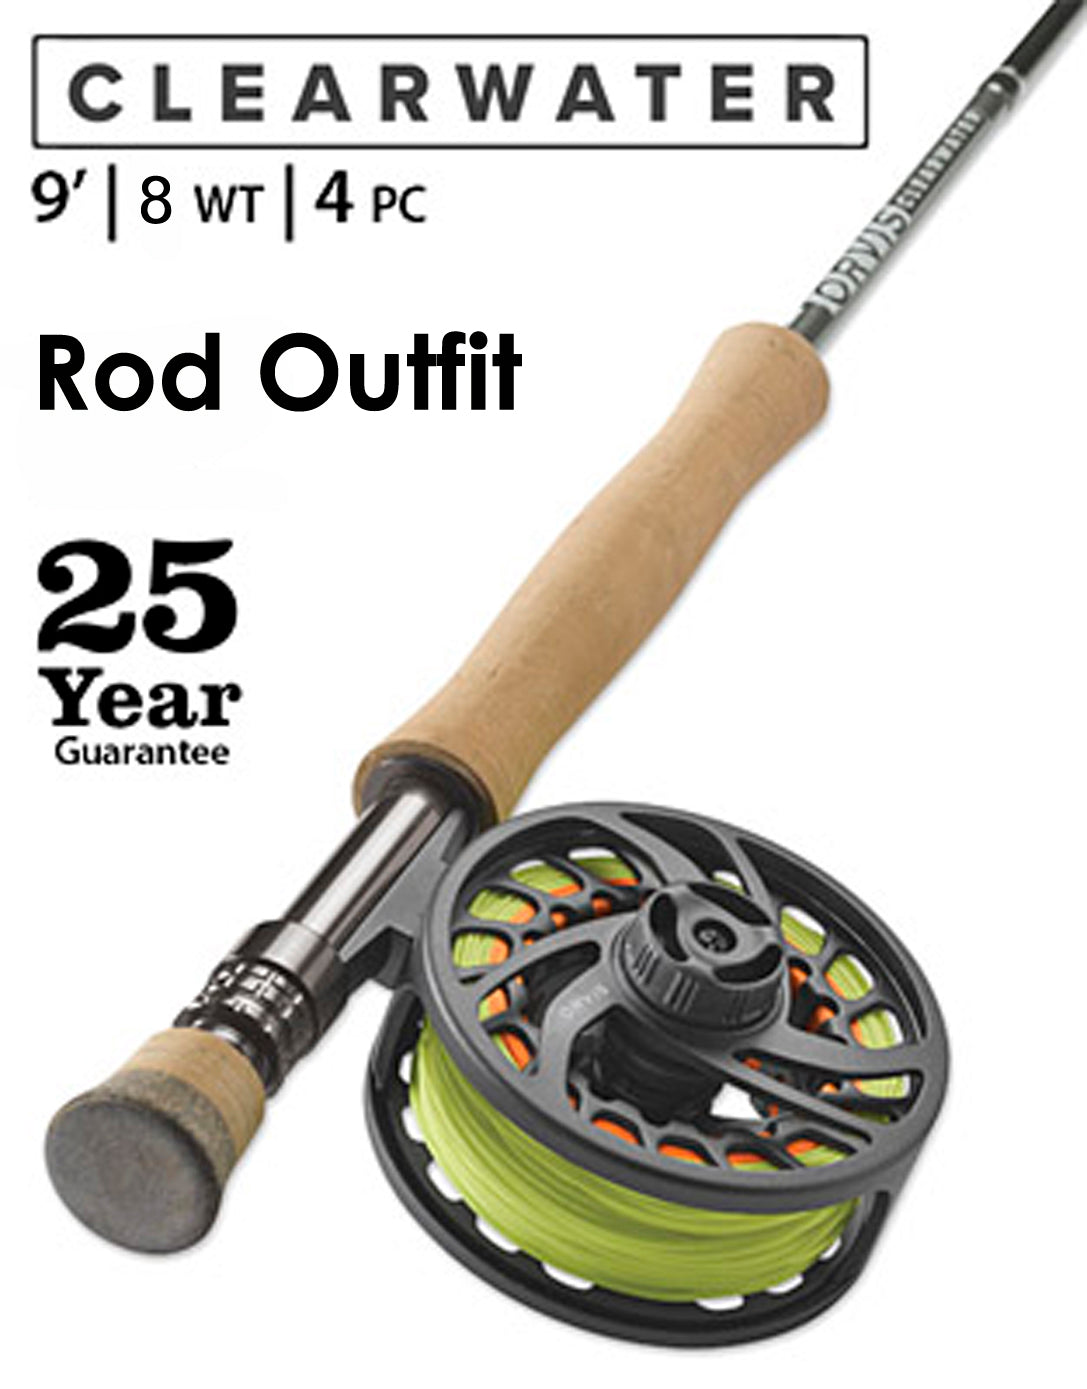 Orvis Clearwater Large Arbor Fly Reels | Aussie Angler